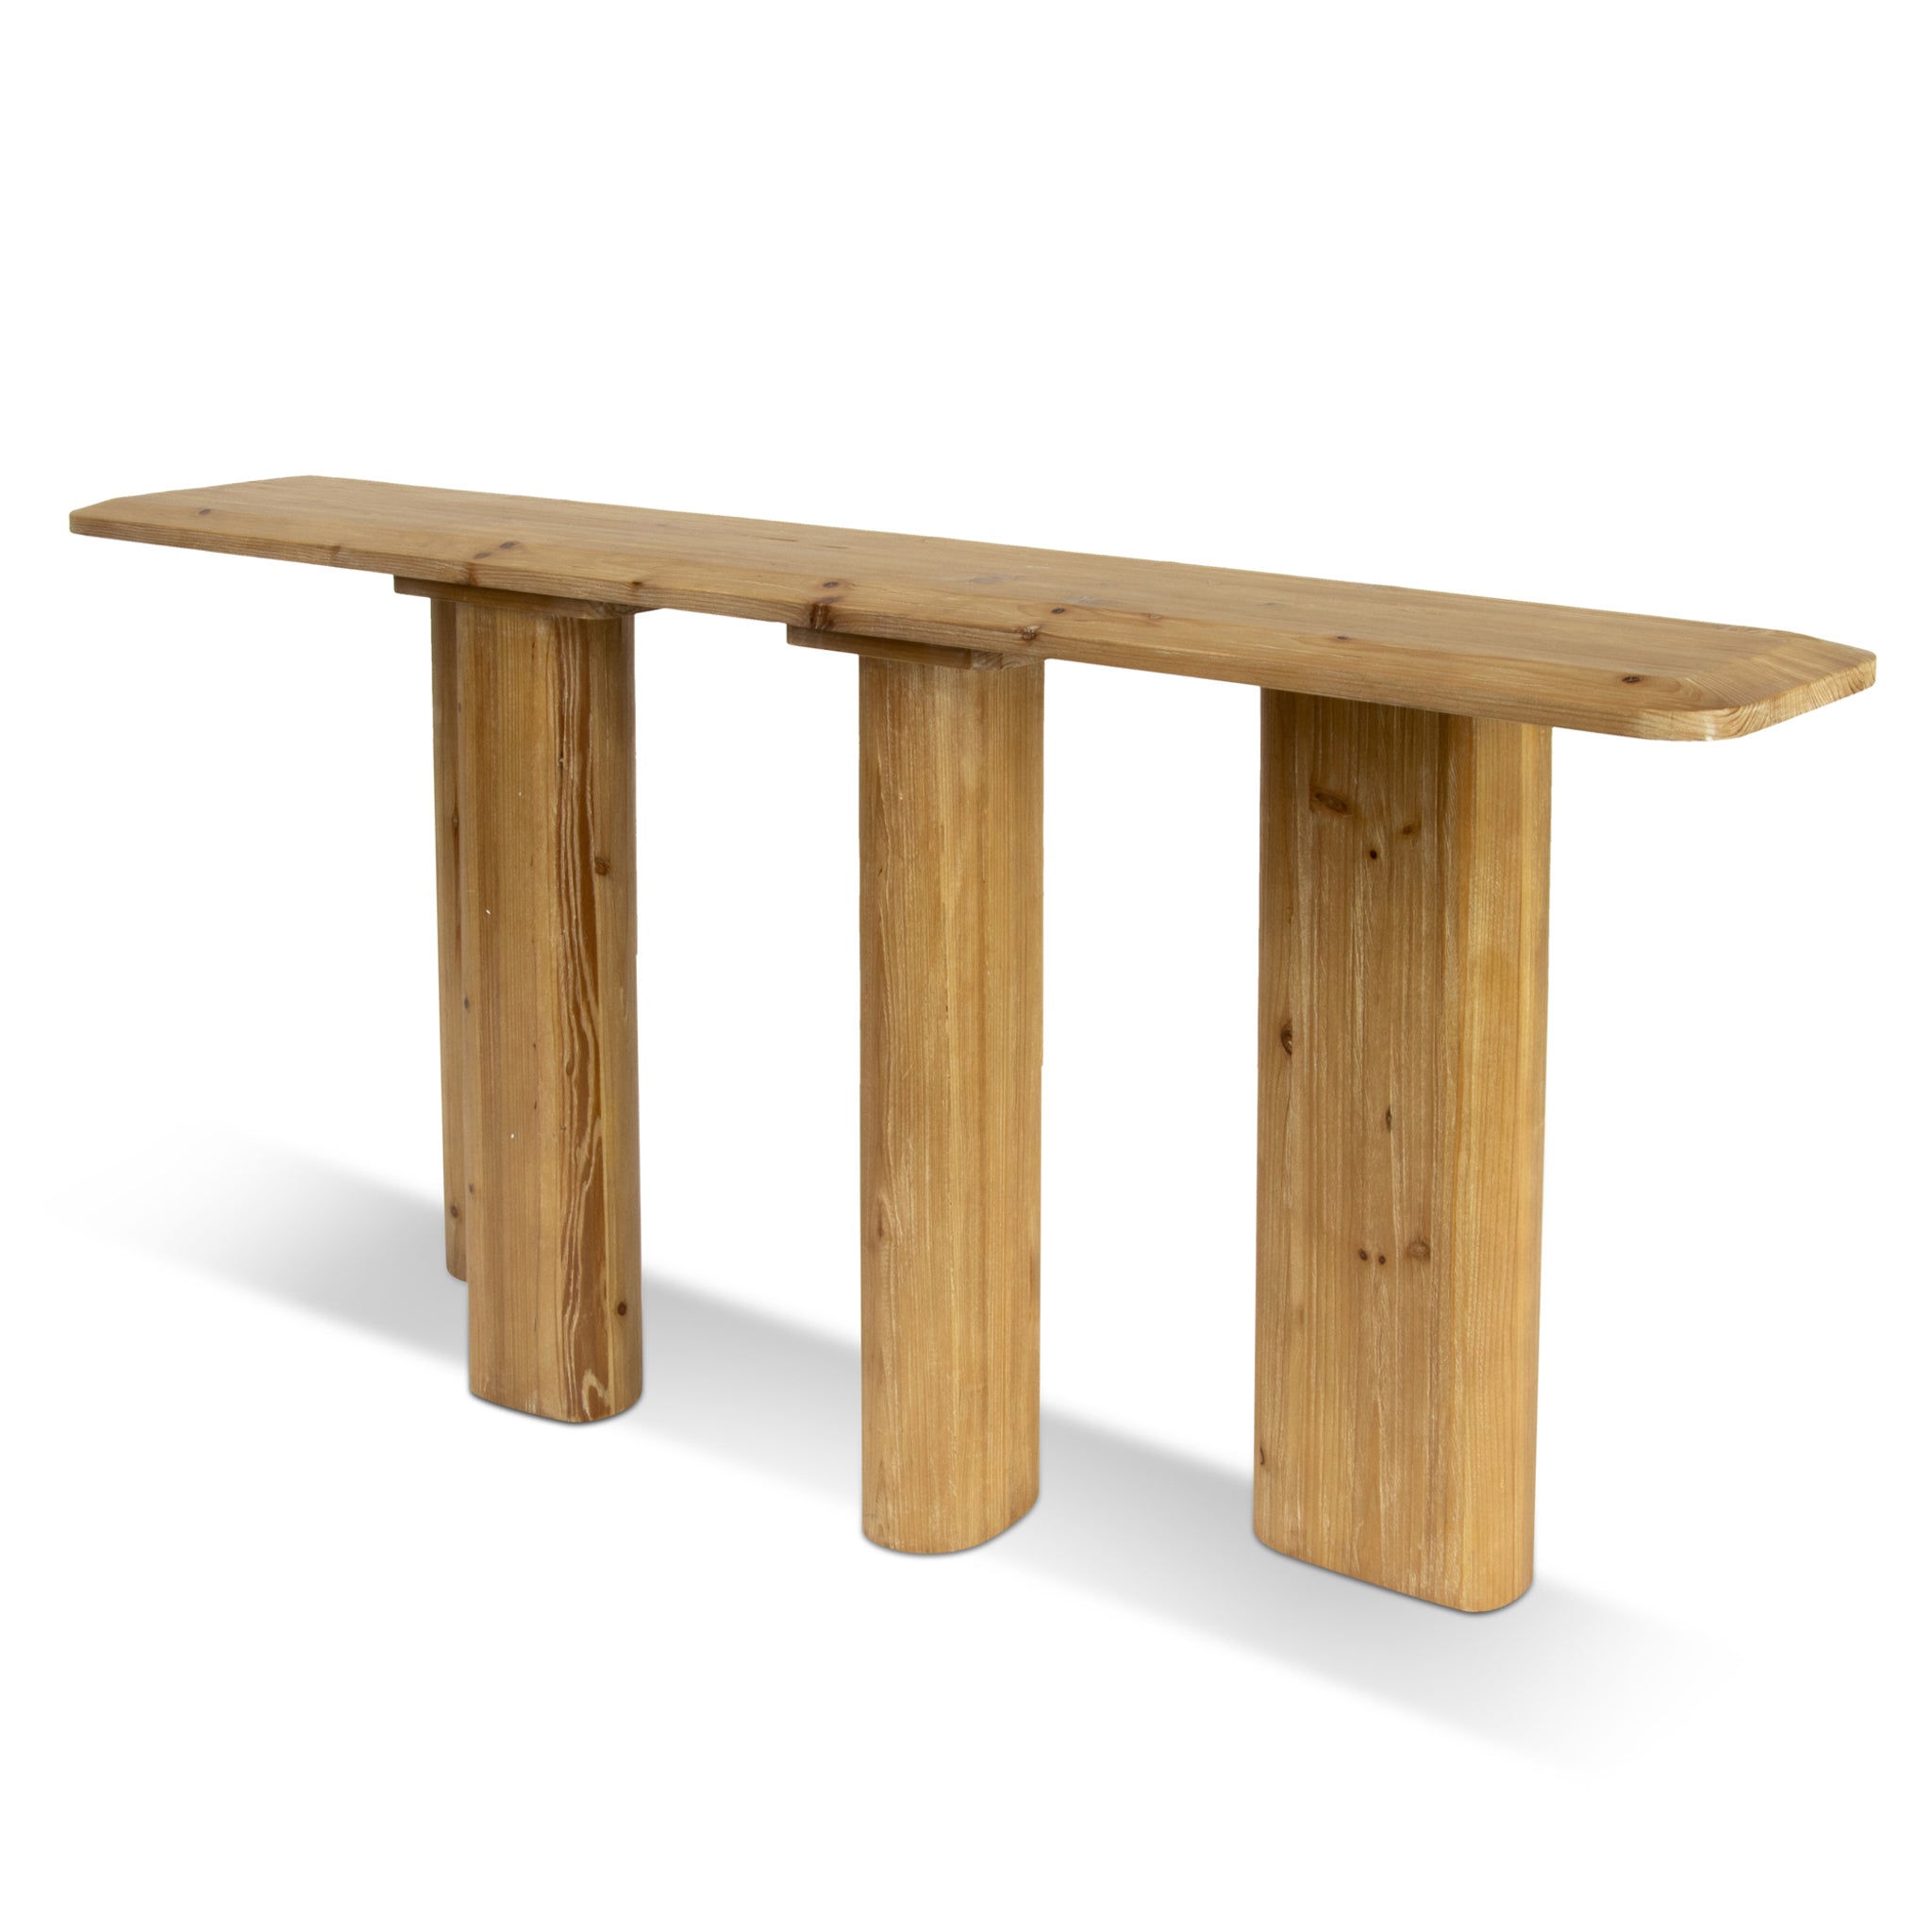 Layla 1.8m Wooden Console Table - Natural - Console